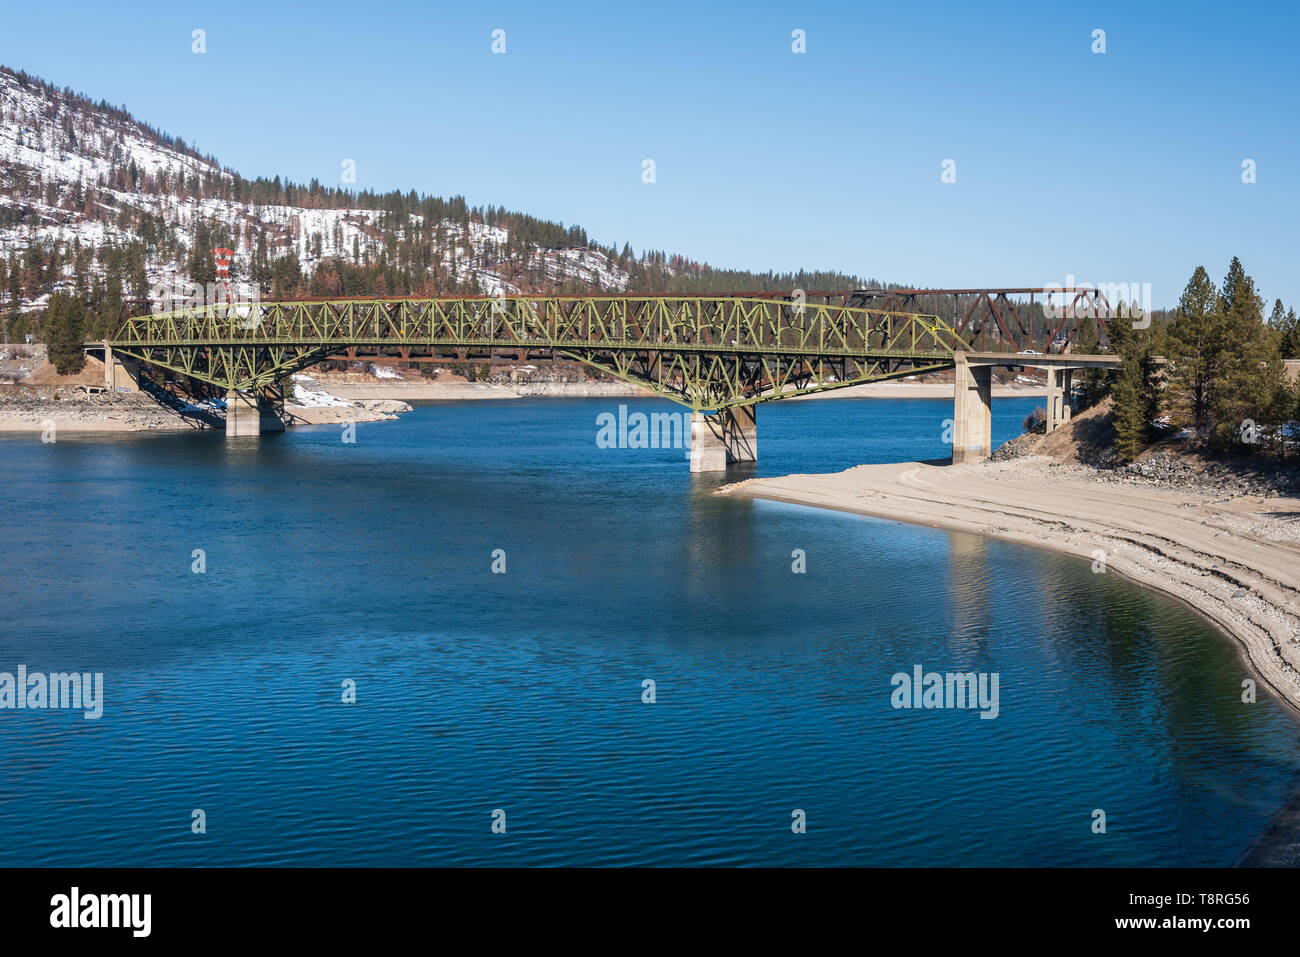 State Highway 20, US Highway 395 and the railroad cross Lake Roosevelt at Kettle Falls, Washington on Steel Truss Bridges in the early spring Stock Photo